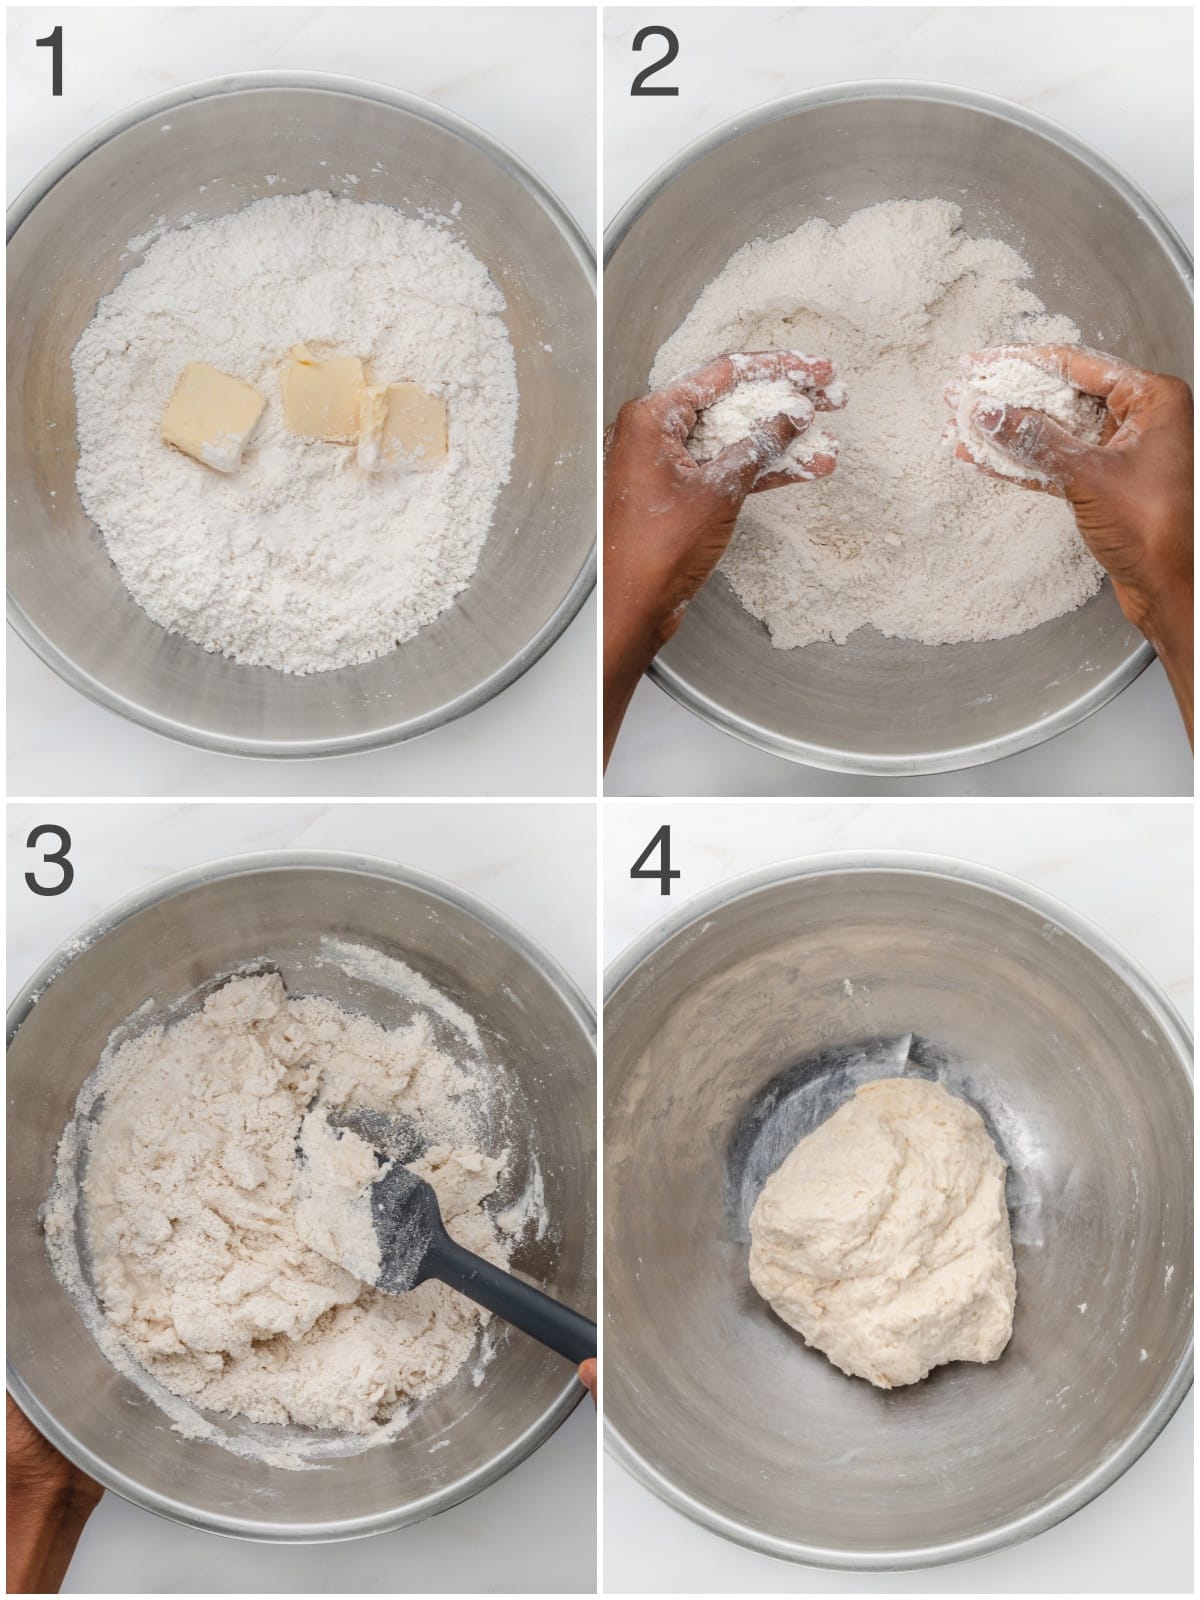 step by step photos showing how to make basic dough.